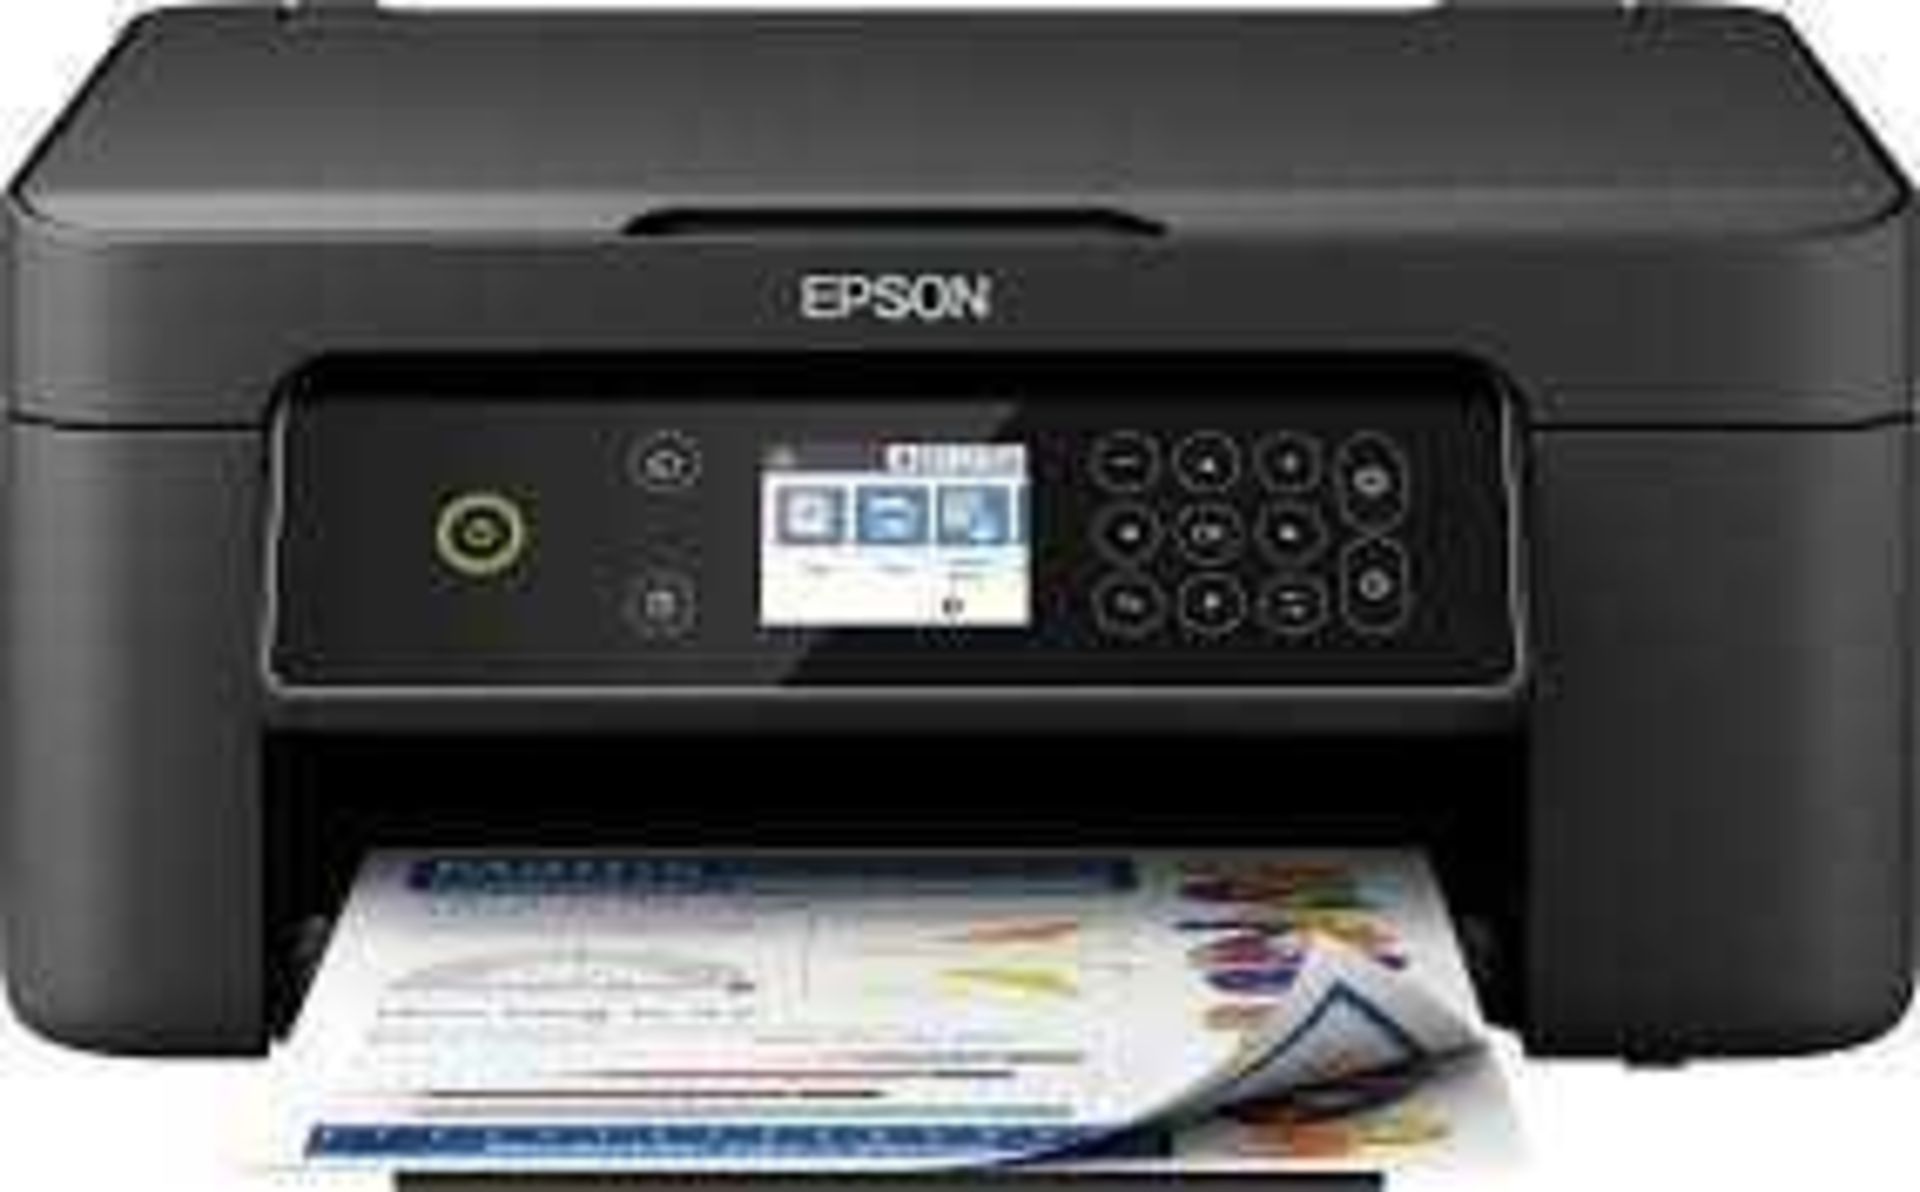 RRP £210 Epson And Hp Printers, Home Xp-4150 And Envy 6020E. Boxed/Checked/Untested (Like New) (T)( - Image 2 of 3